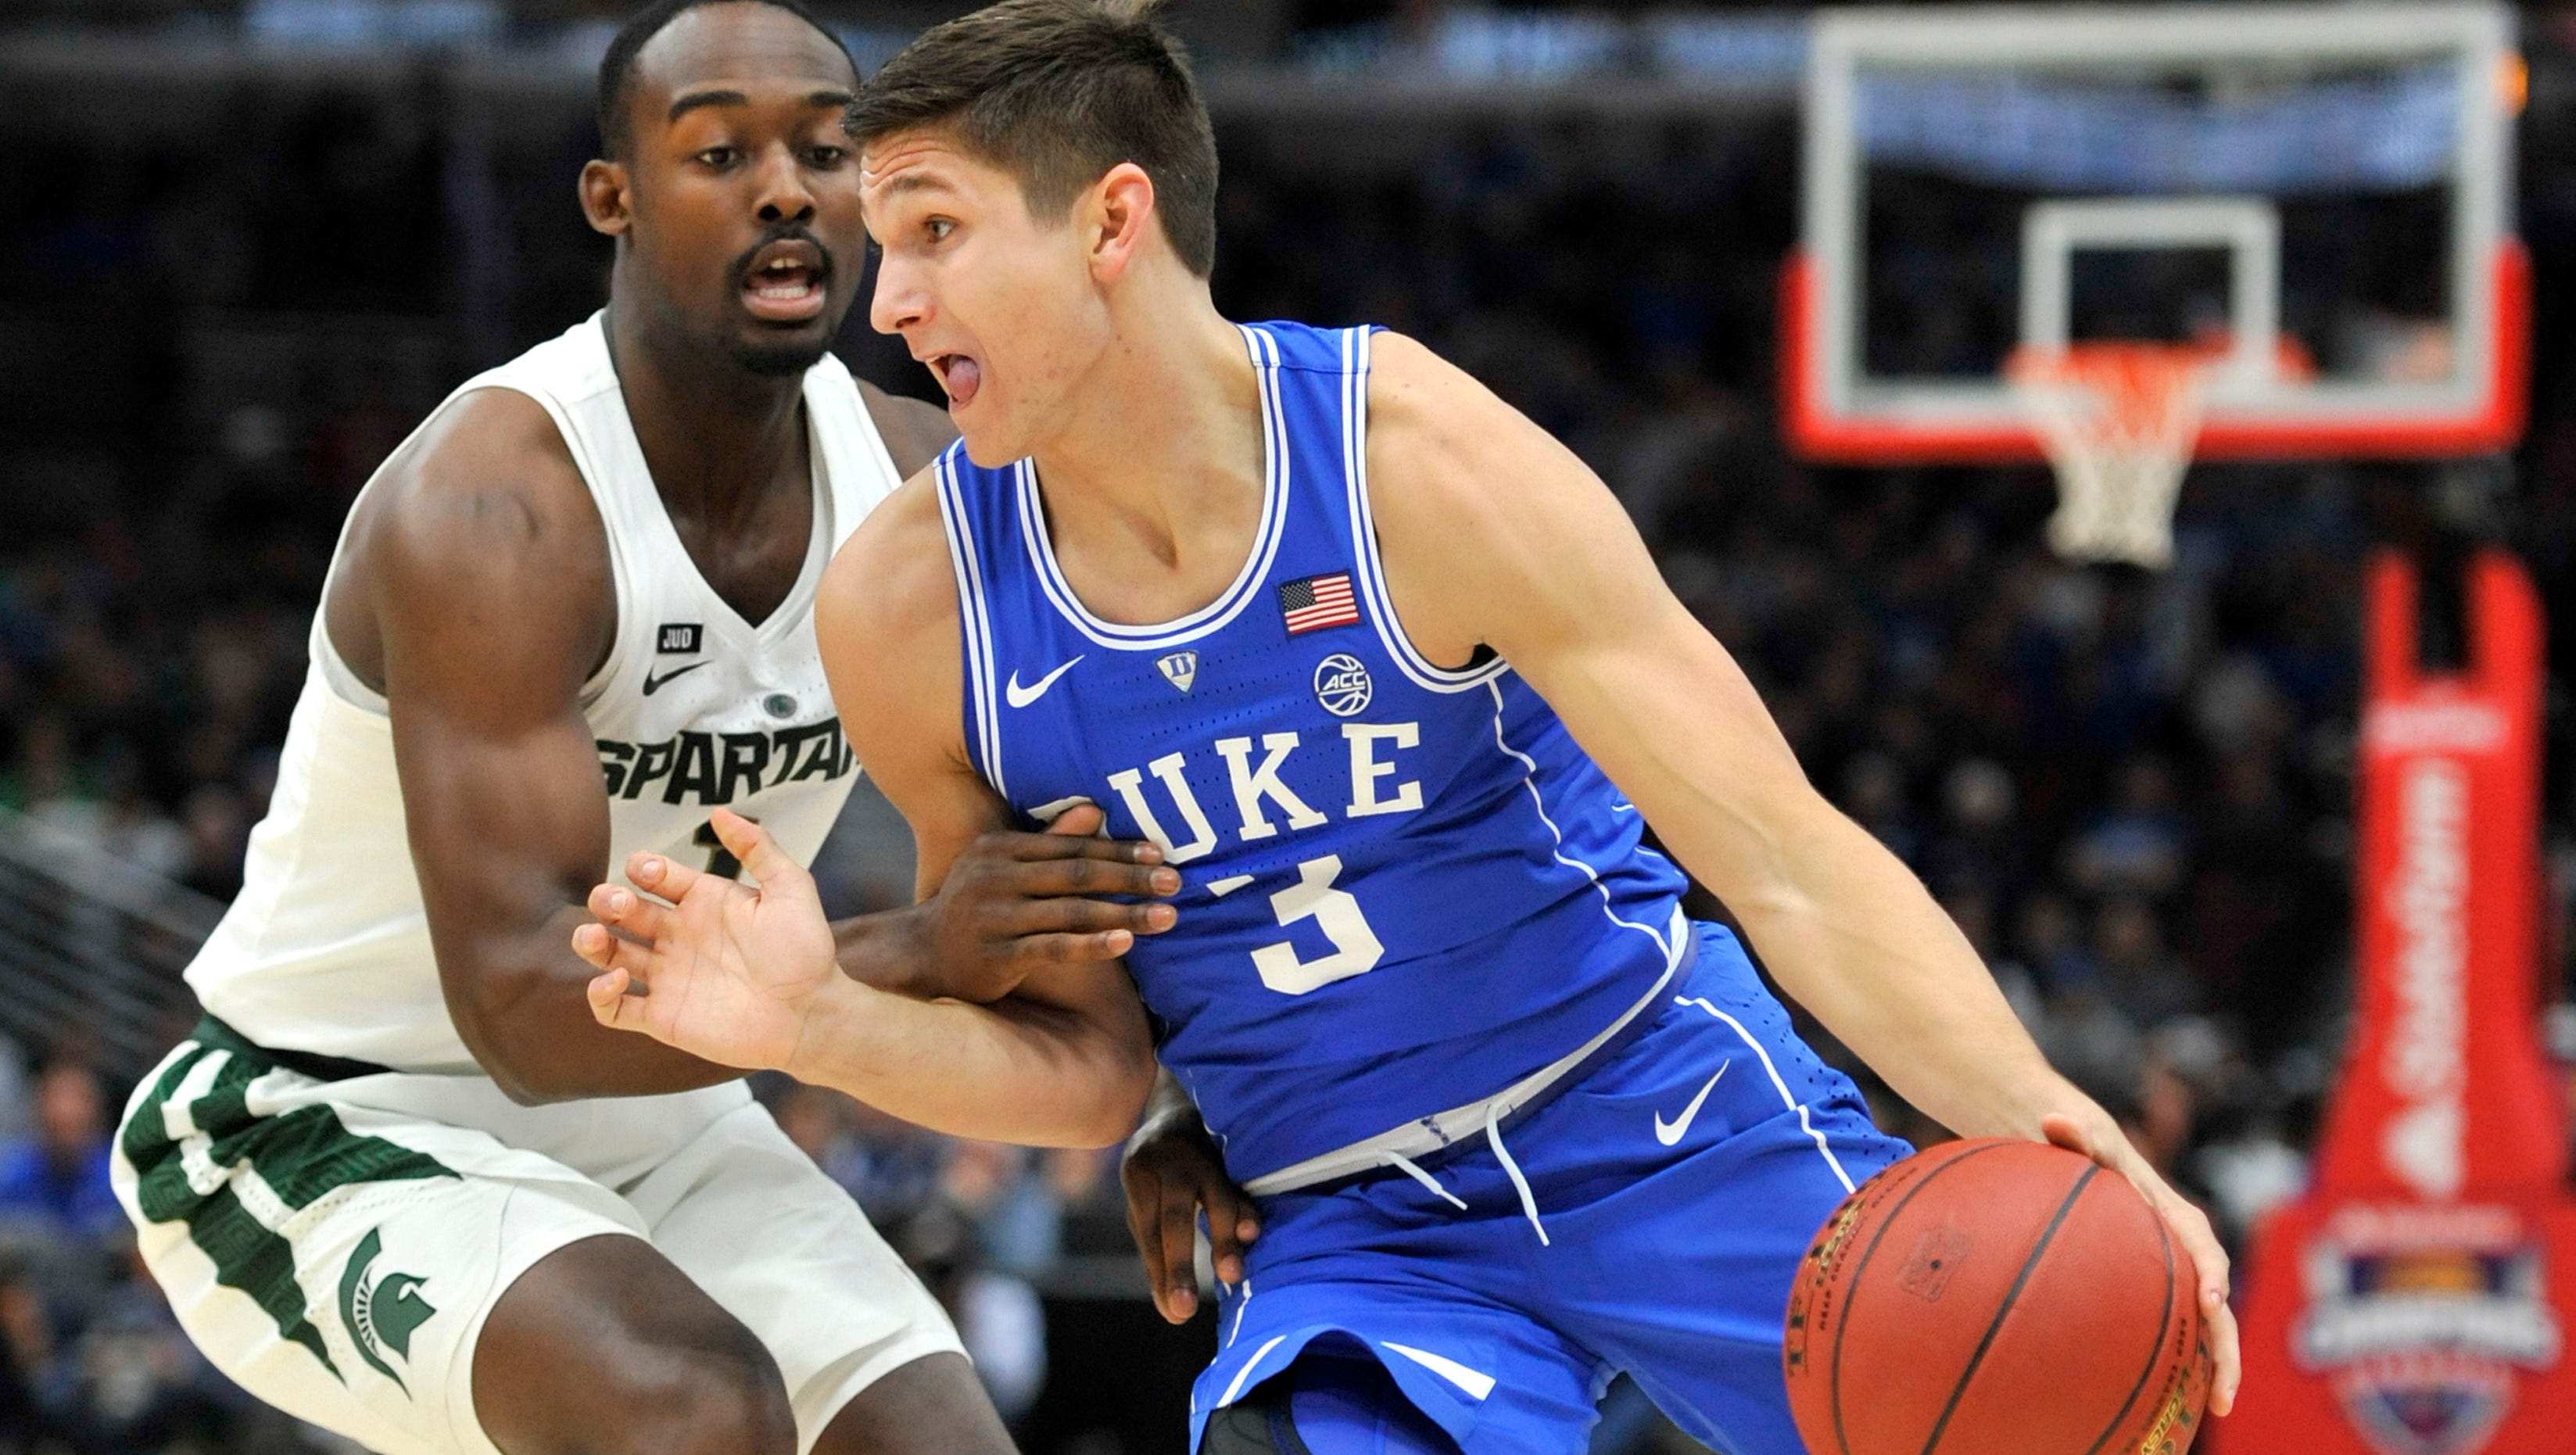 30. Atlanta Hawks: Grayson Allen, SG, Sr., Duke. The Hawks complete a solid first round with one of the best shooters in the draft. He's got some spunk and some want-to, which the Hawks need to rejuvenate their roster. He also knows how to get to the rim and score, but unlike all the talent he had at Duke, he’ll have to show he can do it with a younger roster in Atlanta.